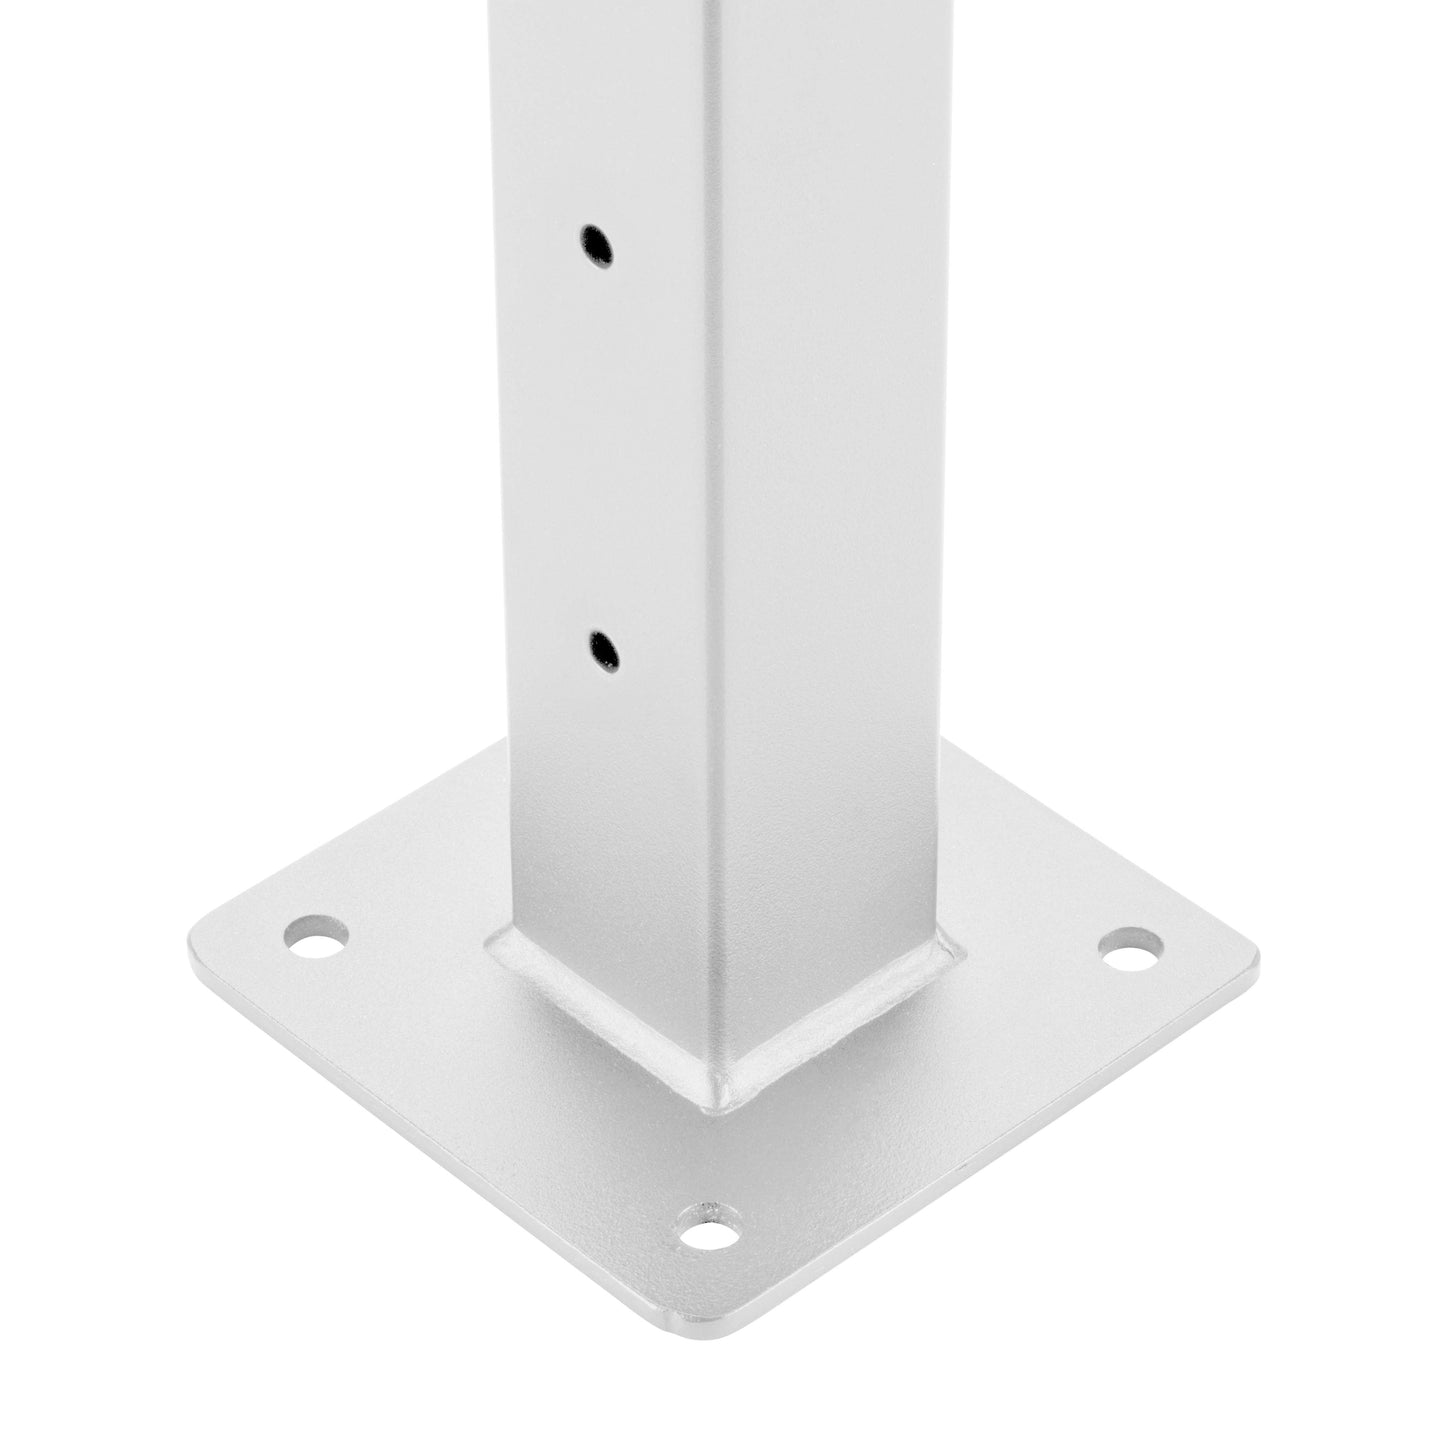 46 ft. x 42 in. White Deck Cable Railing, Base Mount , Stainless